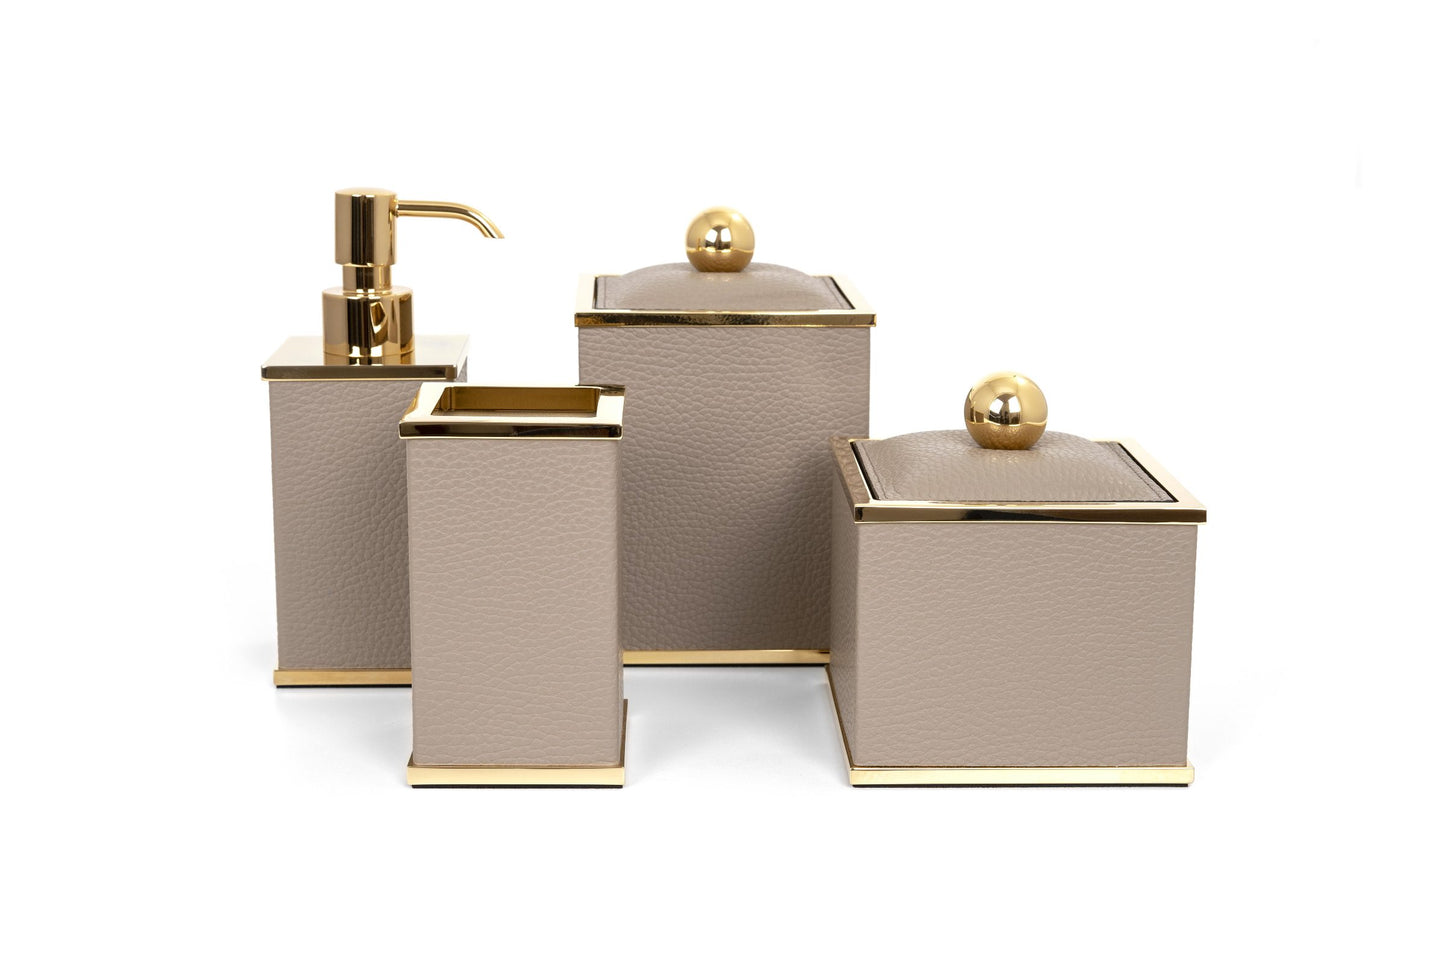 Olimpia Leather-Covered Shiny Gold Brass Bathroom Box Square Small